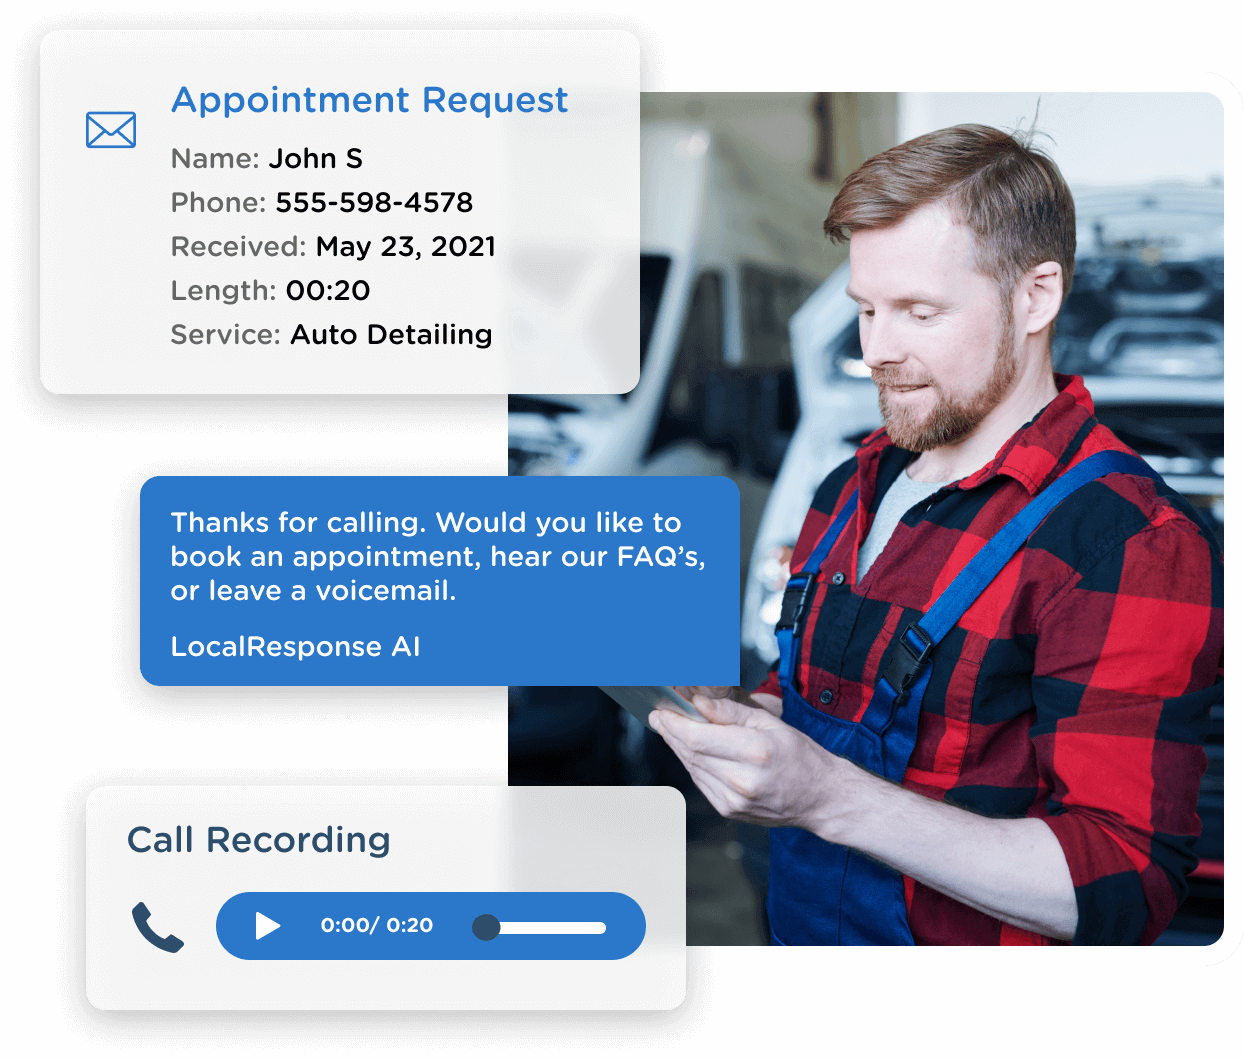 With LocalResponse, the AI-powered bot can pick up missed calls, allowing you to see call insights, including missed call information and call recordings.